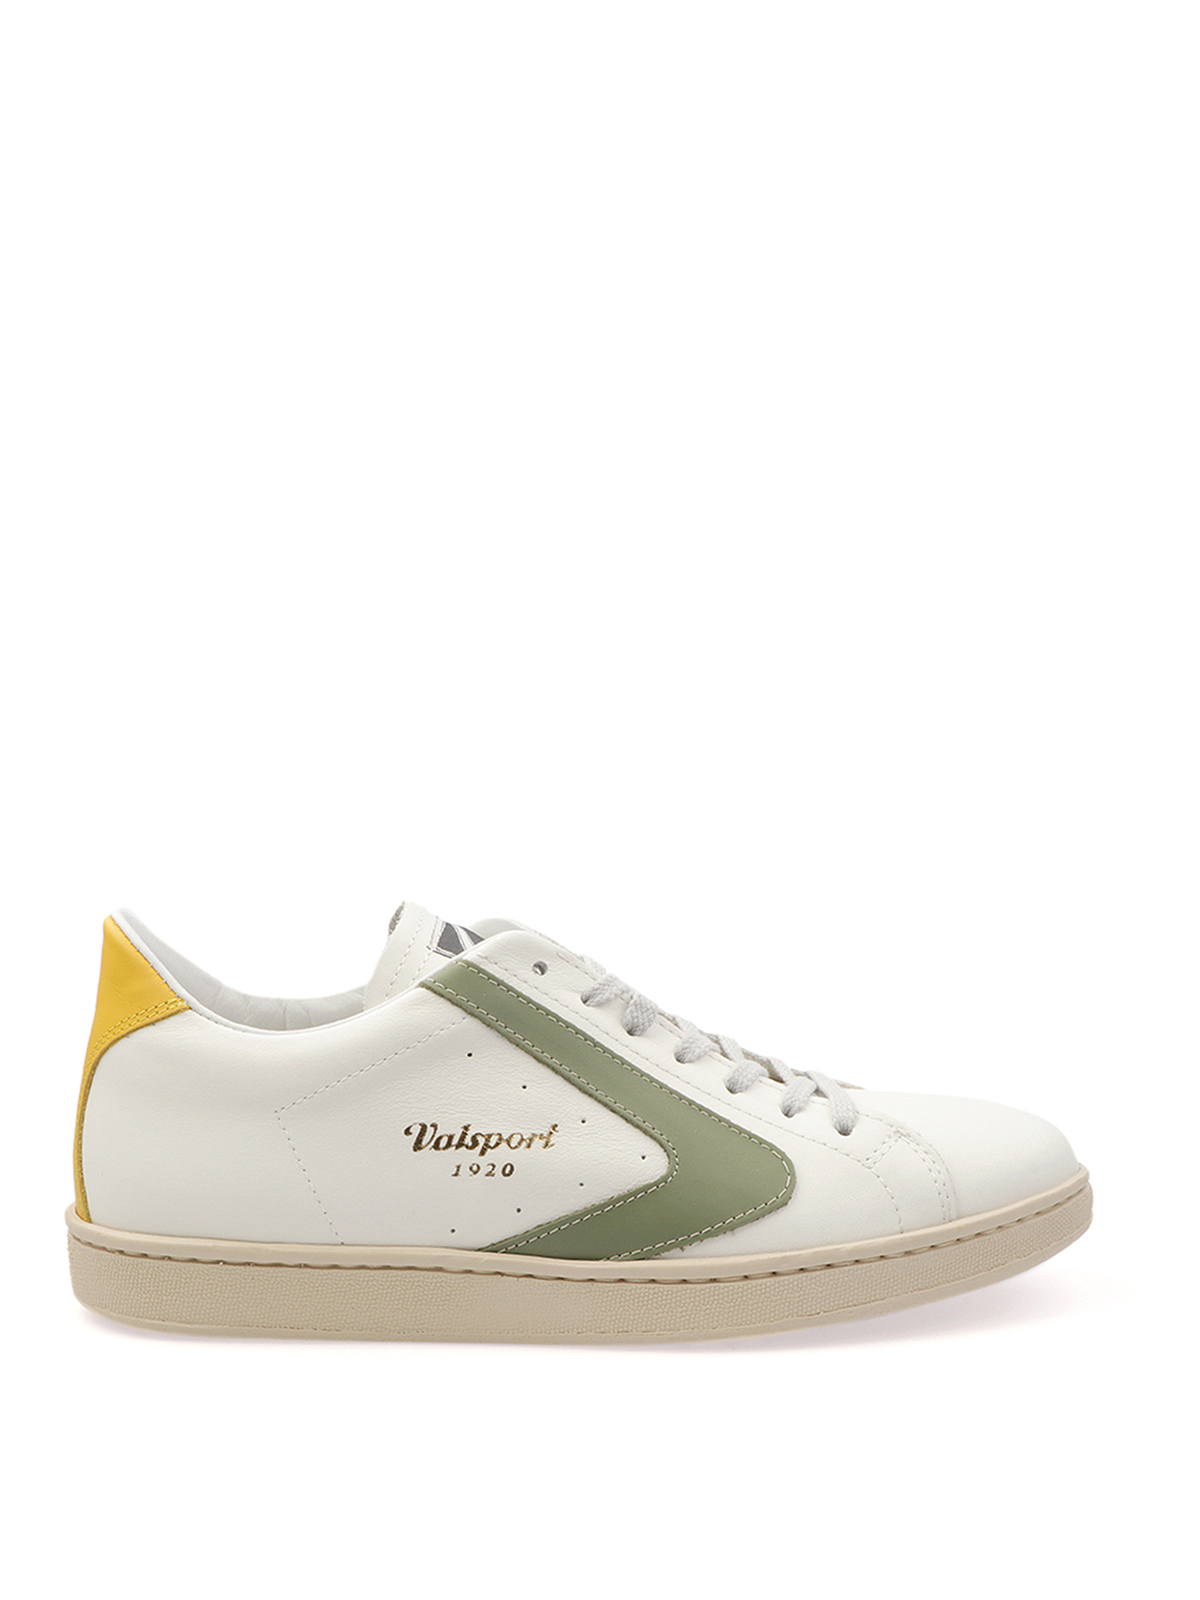 Valsport Tournament Sneakers In White